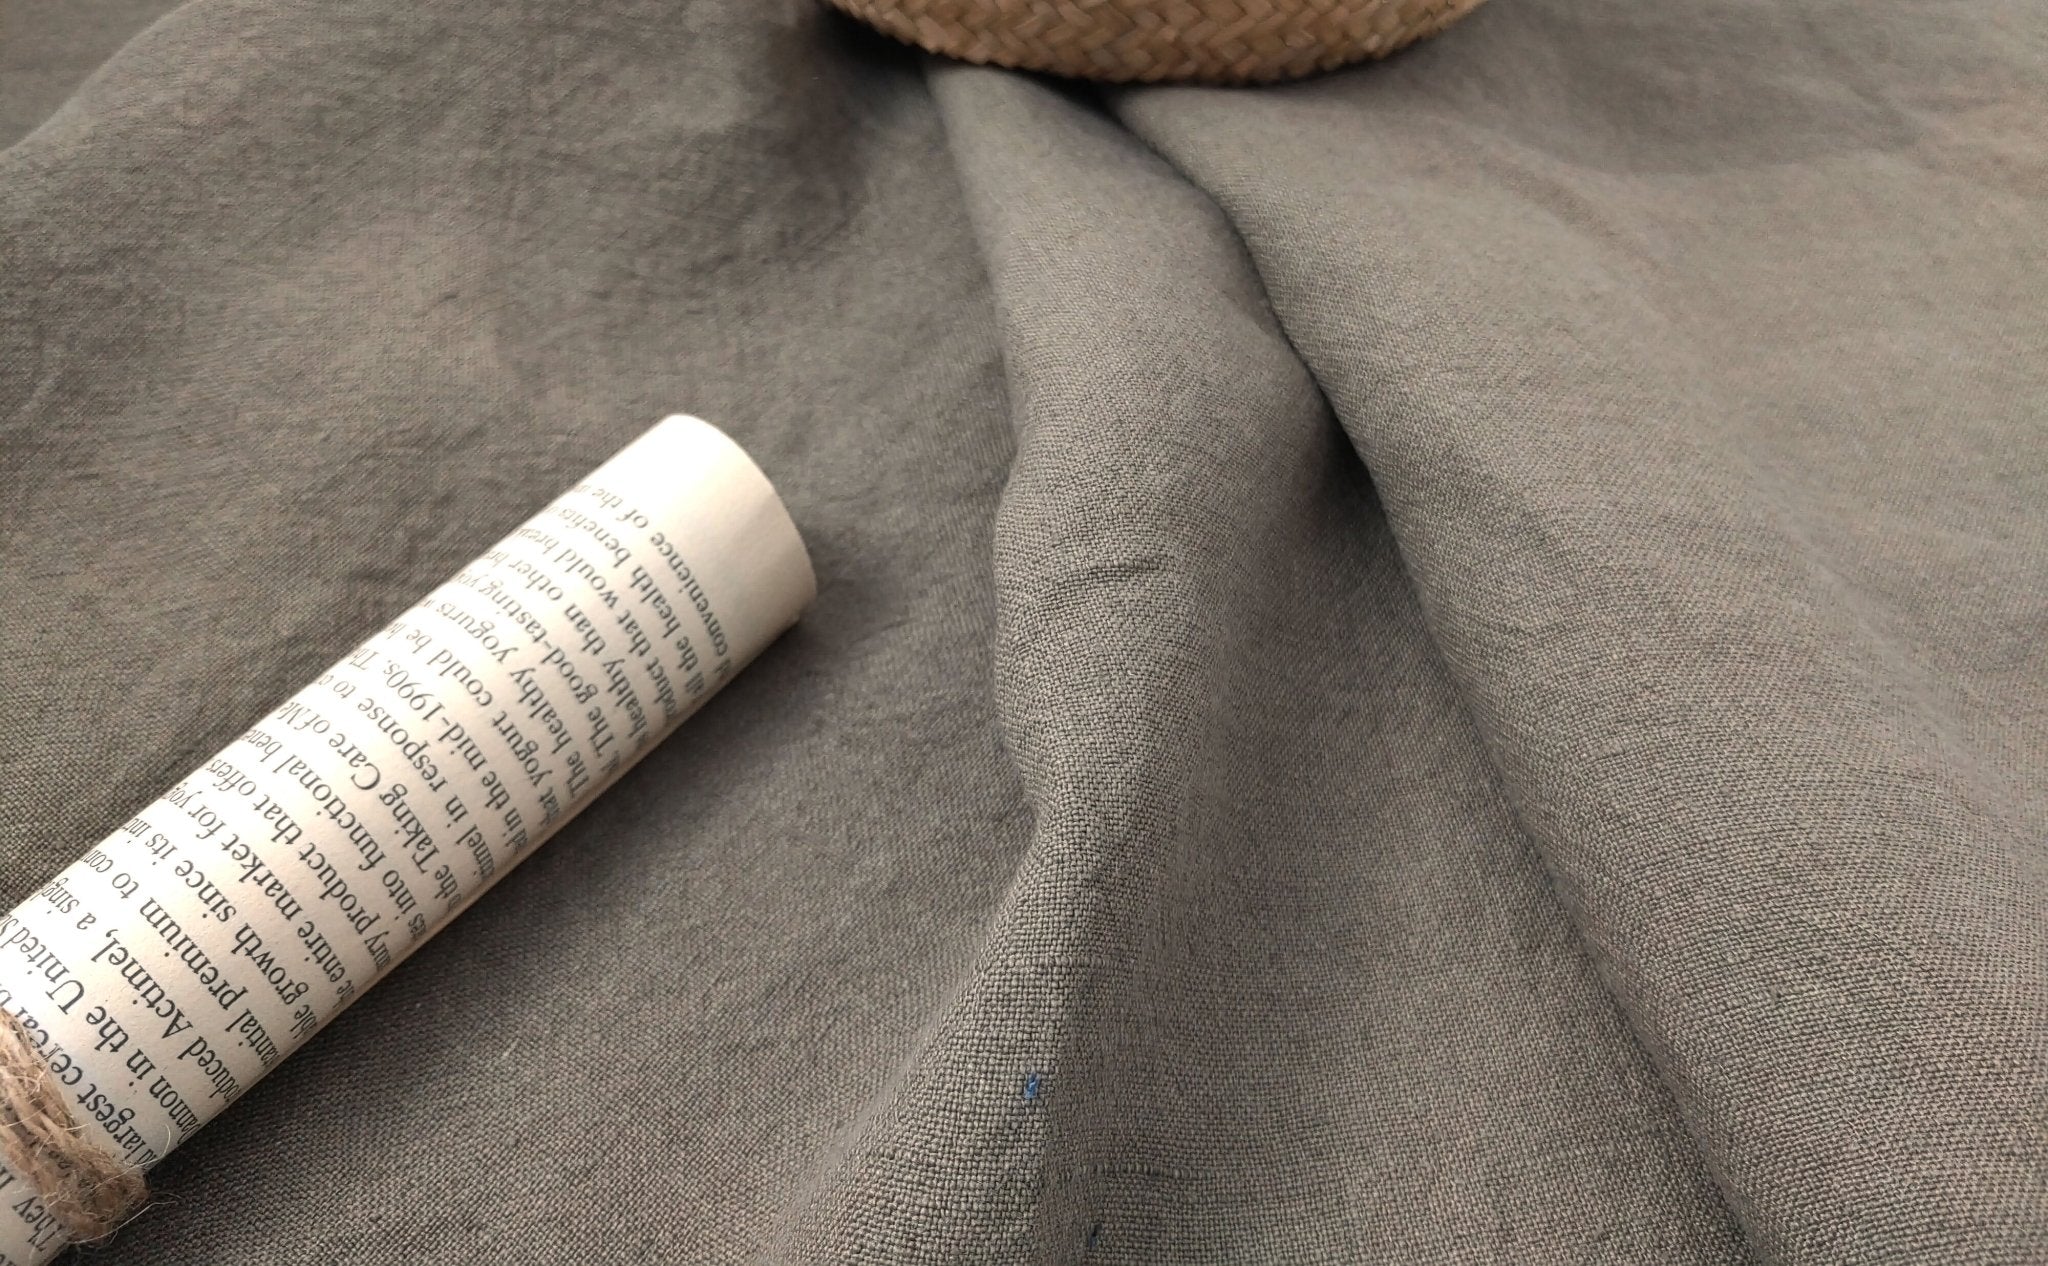 Premium 100% Linen Fabric - 9S High Twisted Yarn for Luxurious Textiles and Crafting Excellence 6772 6481 6480 - The Linen Lab - Beige